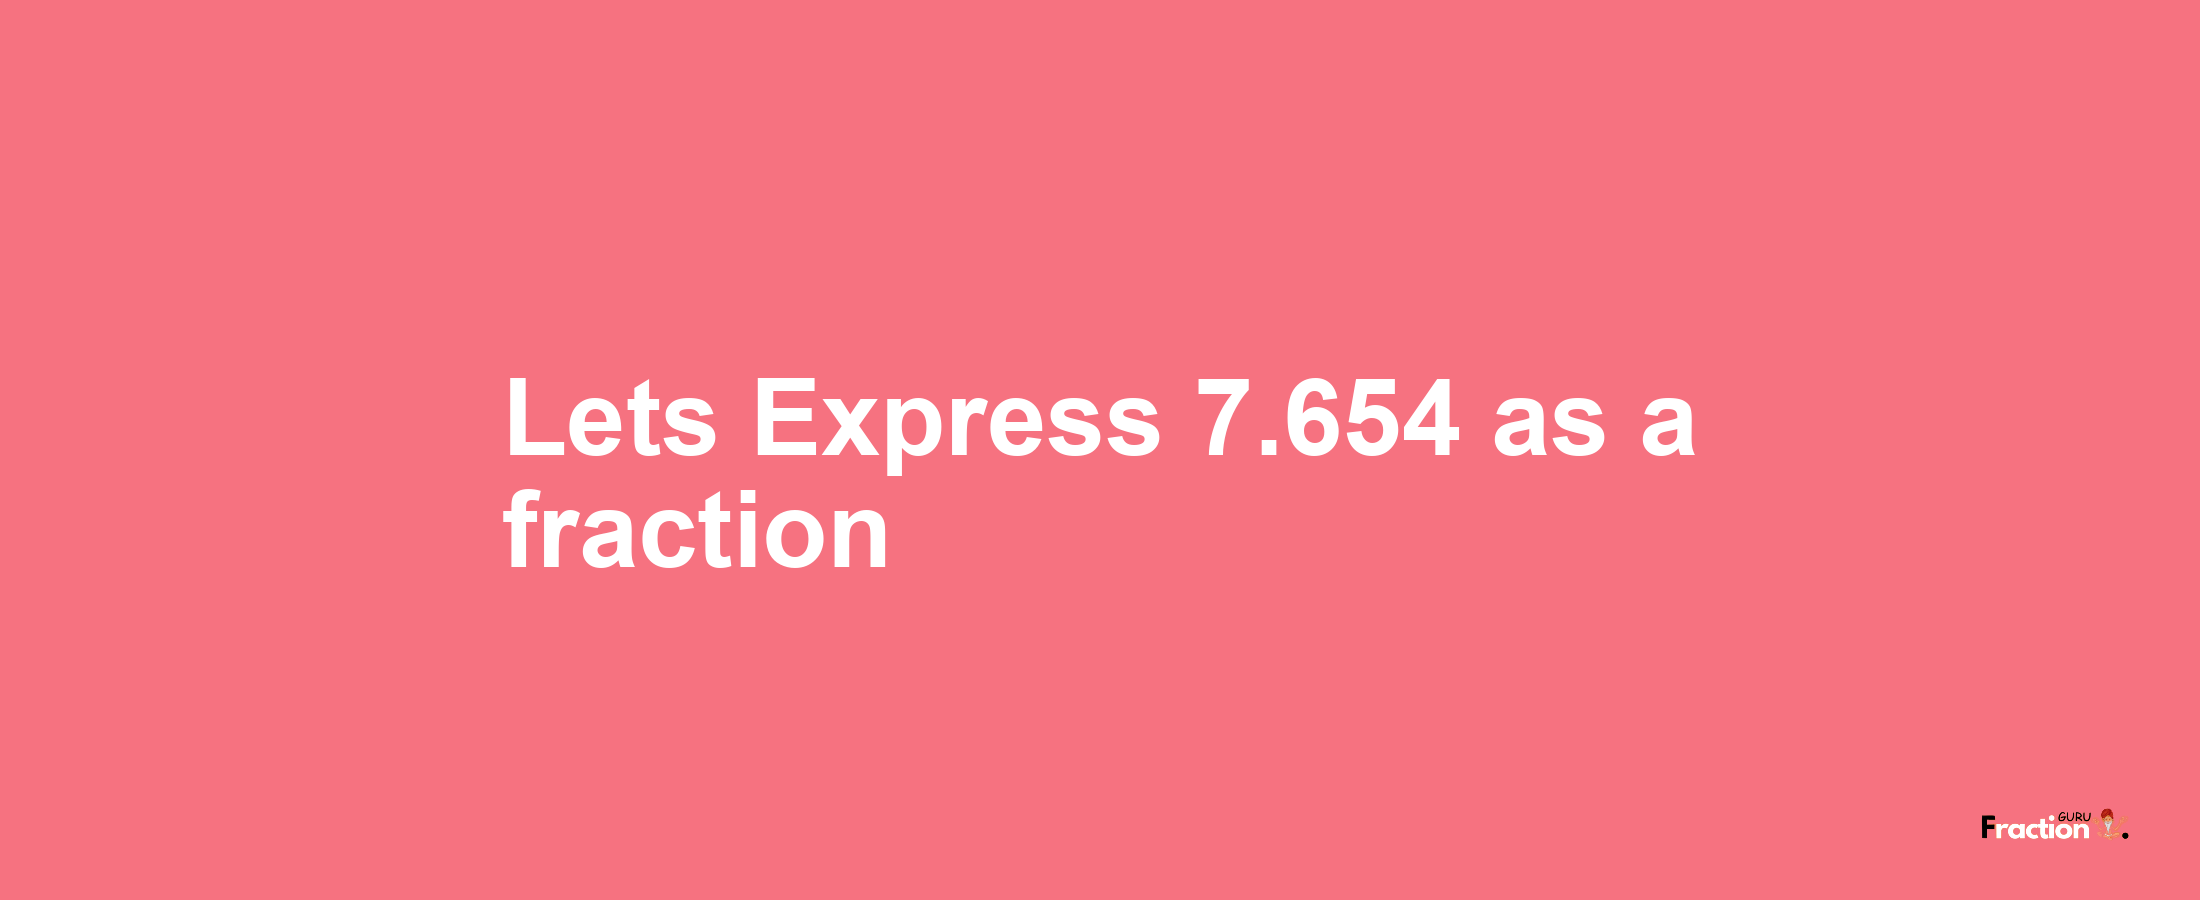 Lets Express 7.654 as afraction